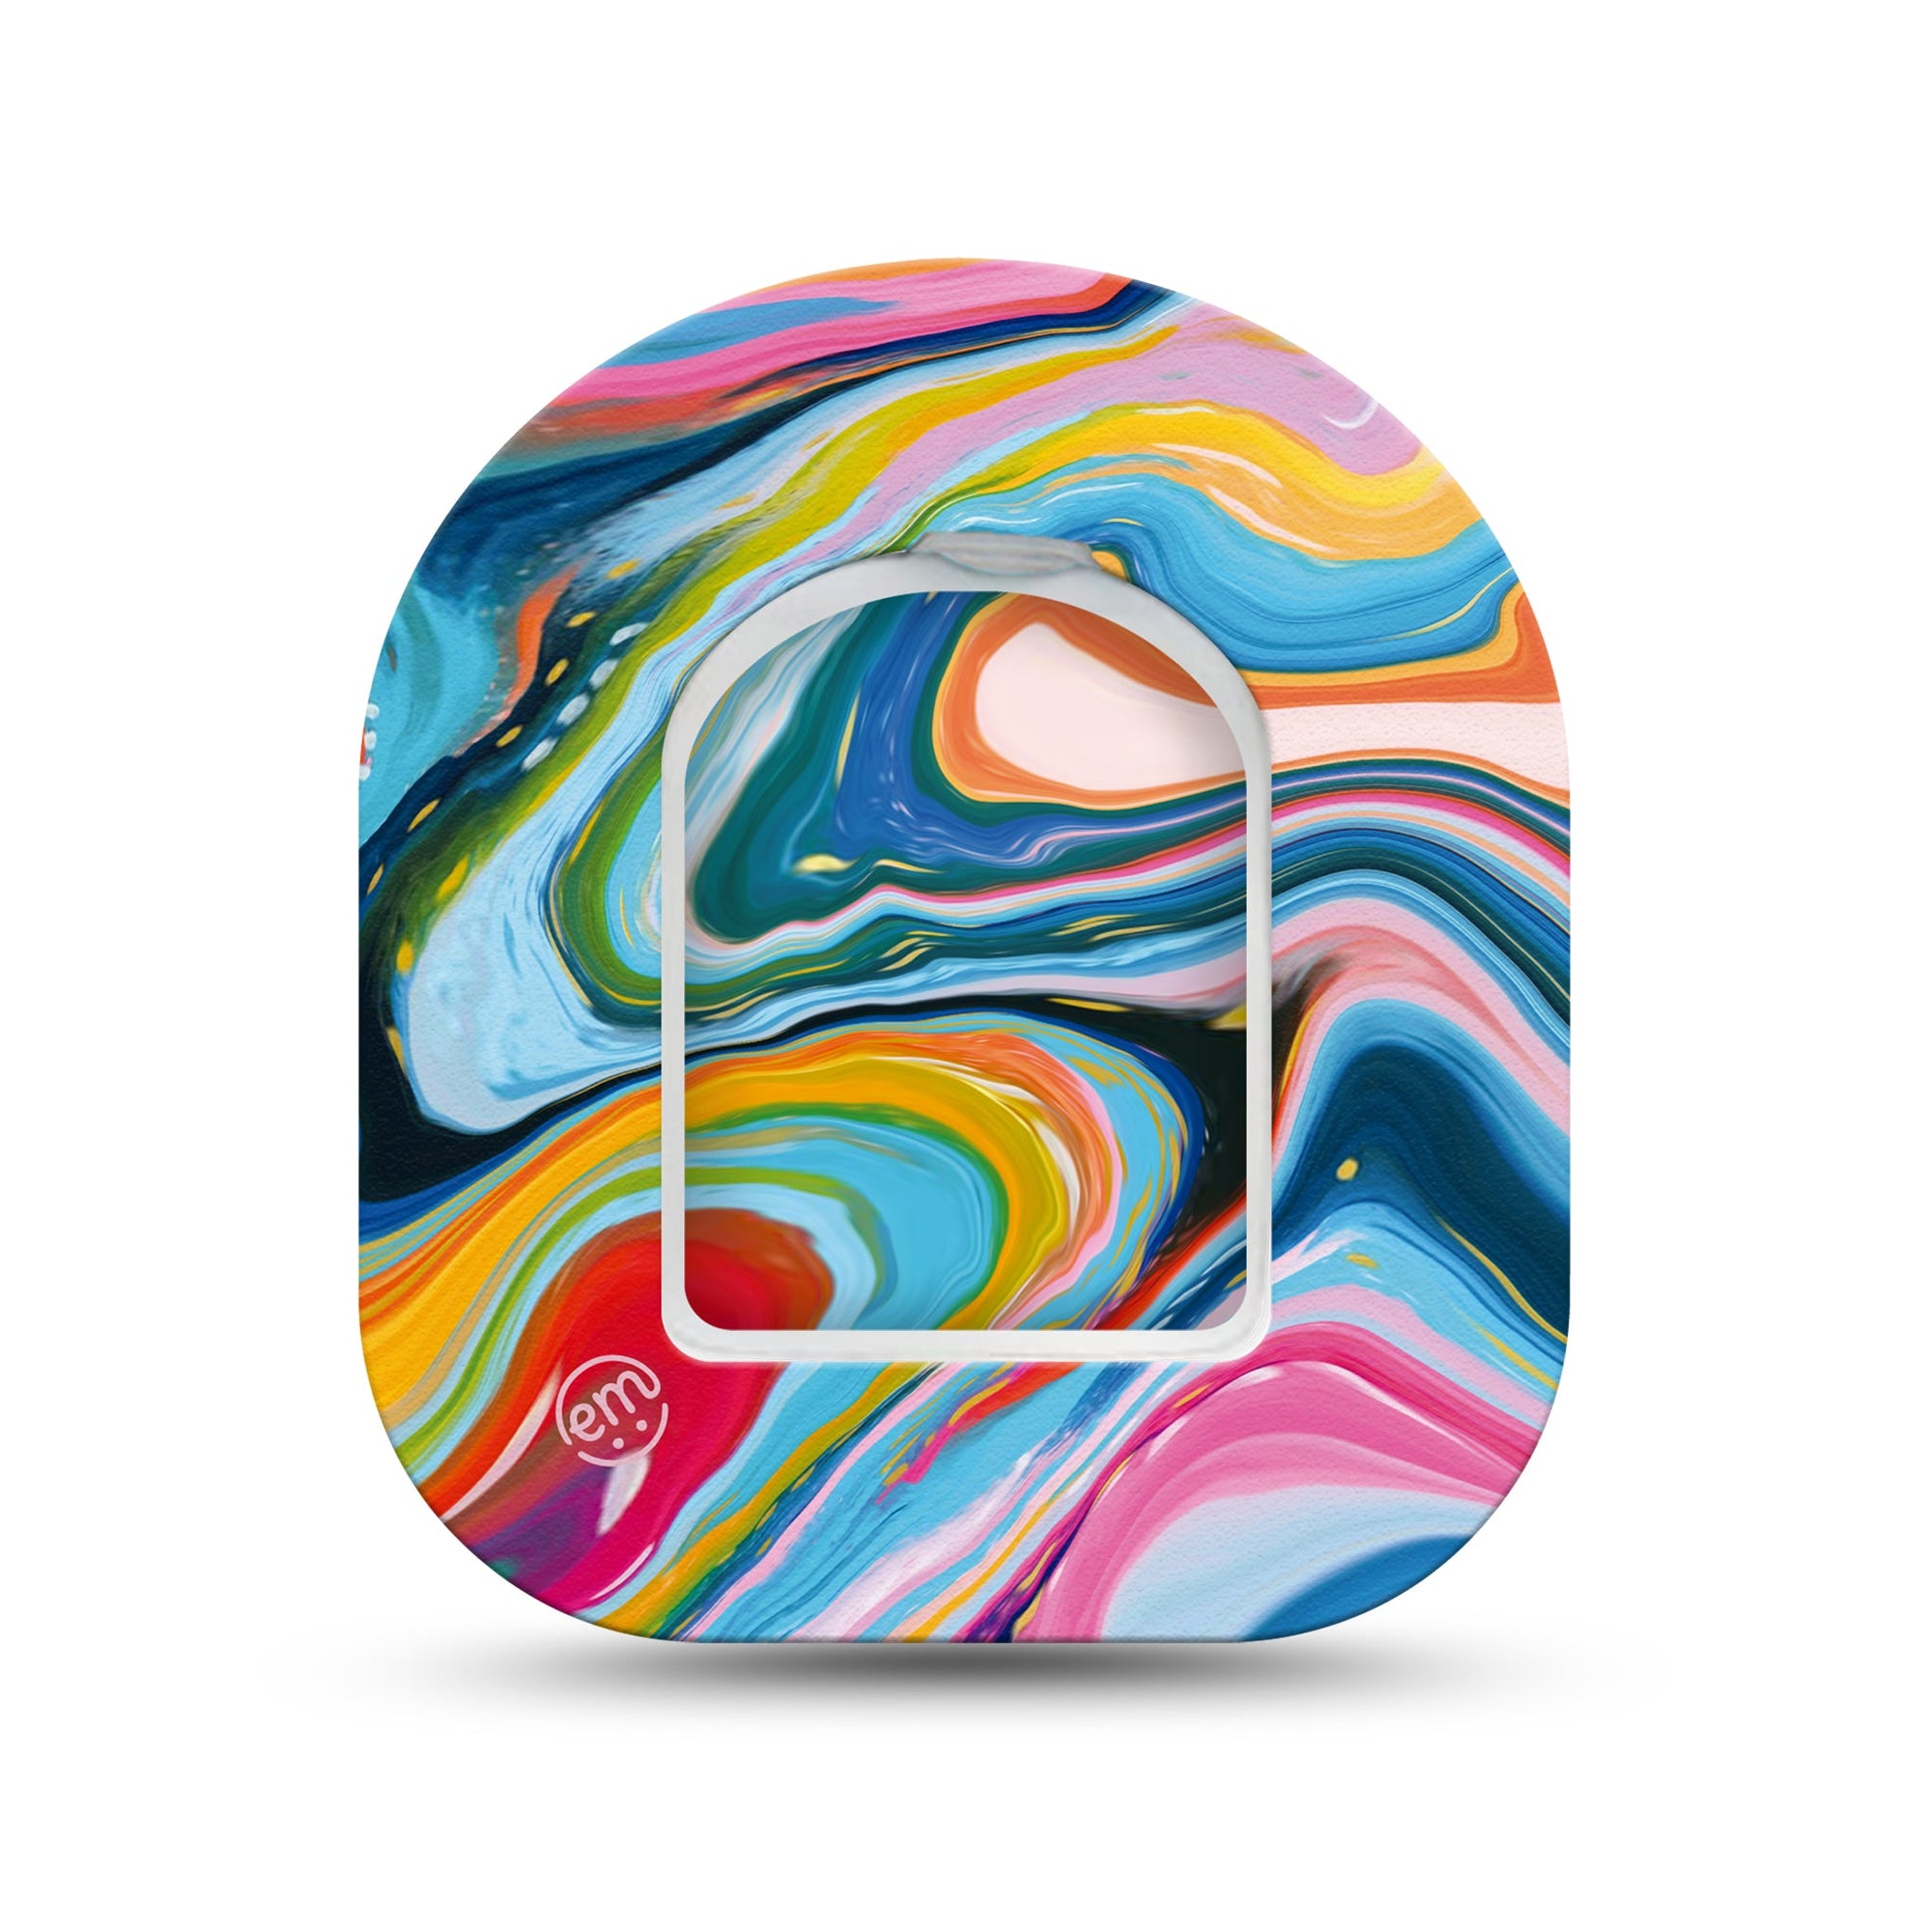 ExpressionMed Color Melting Swirl Pod Mini Tape Single Sticker and Single Tape, Abstract Art Overlay Patch Pump Design